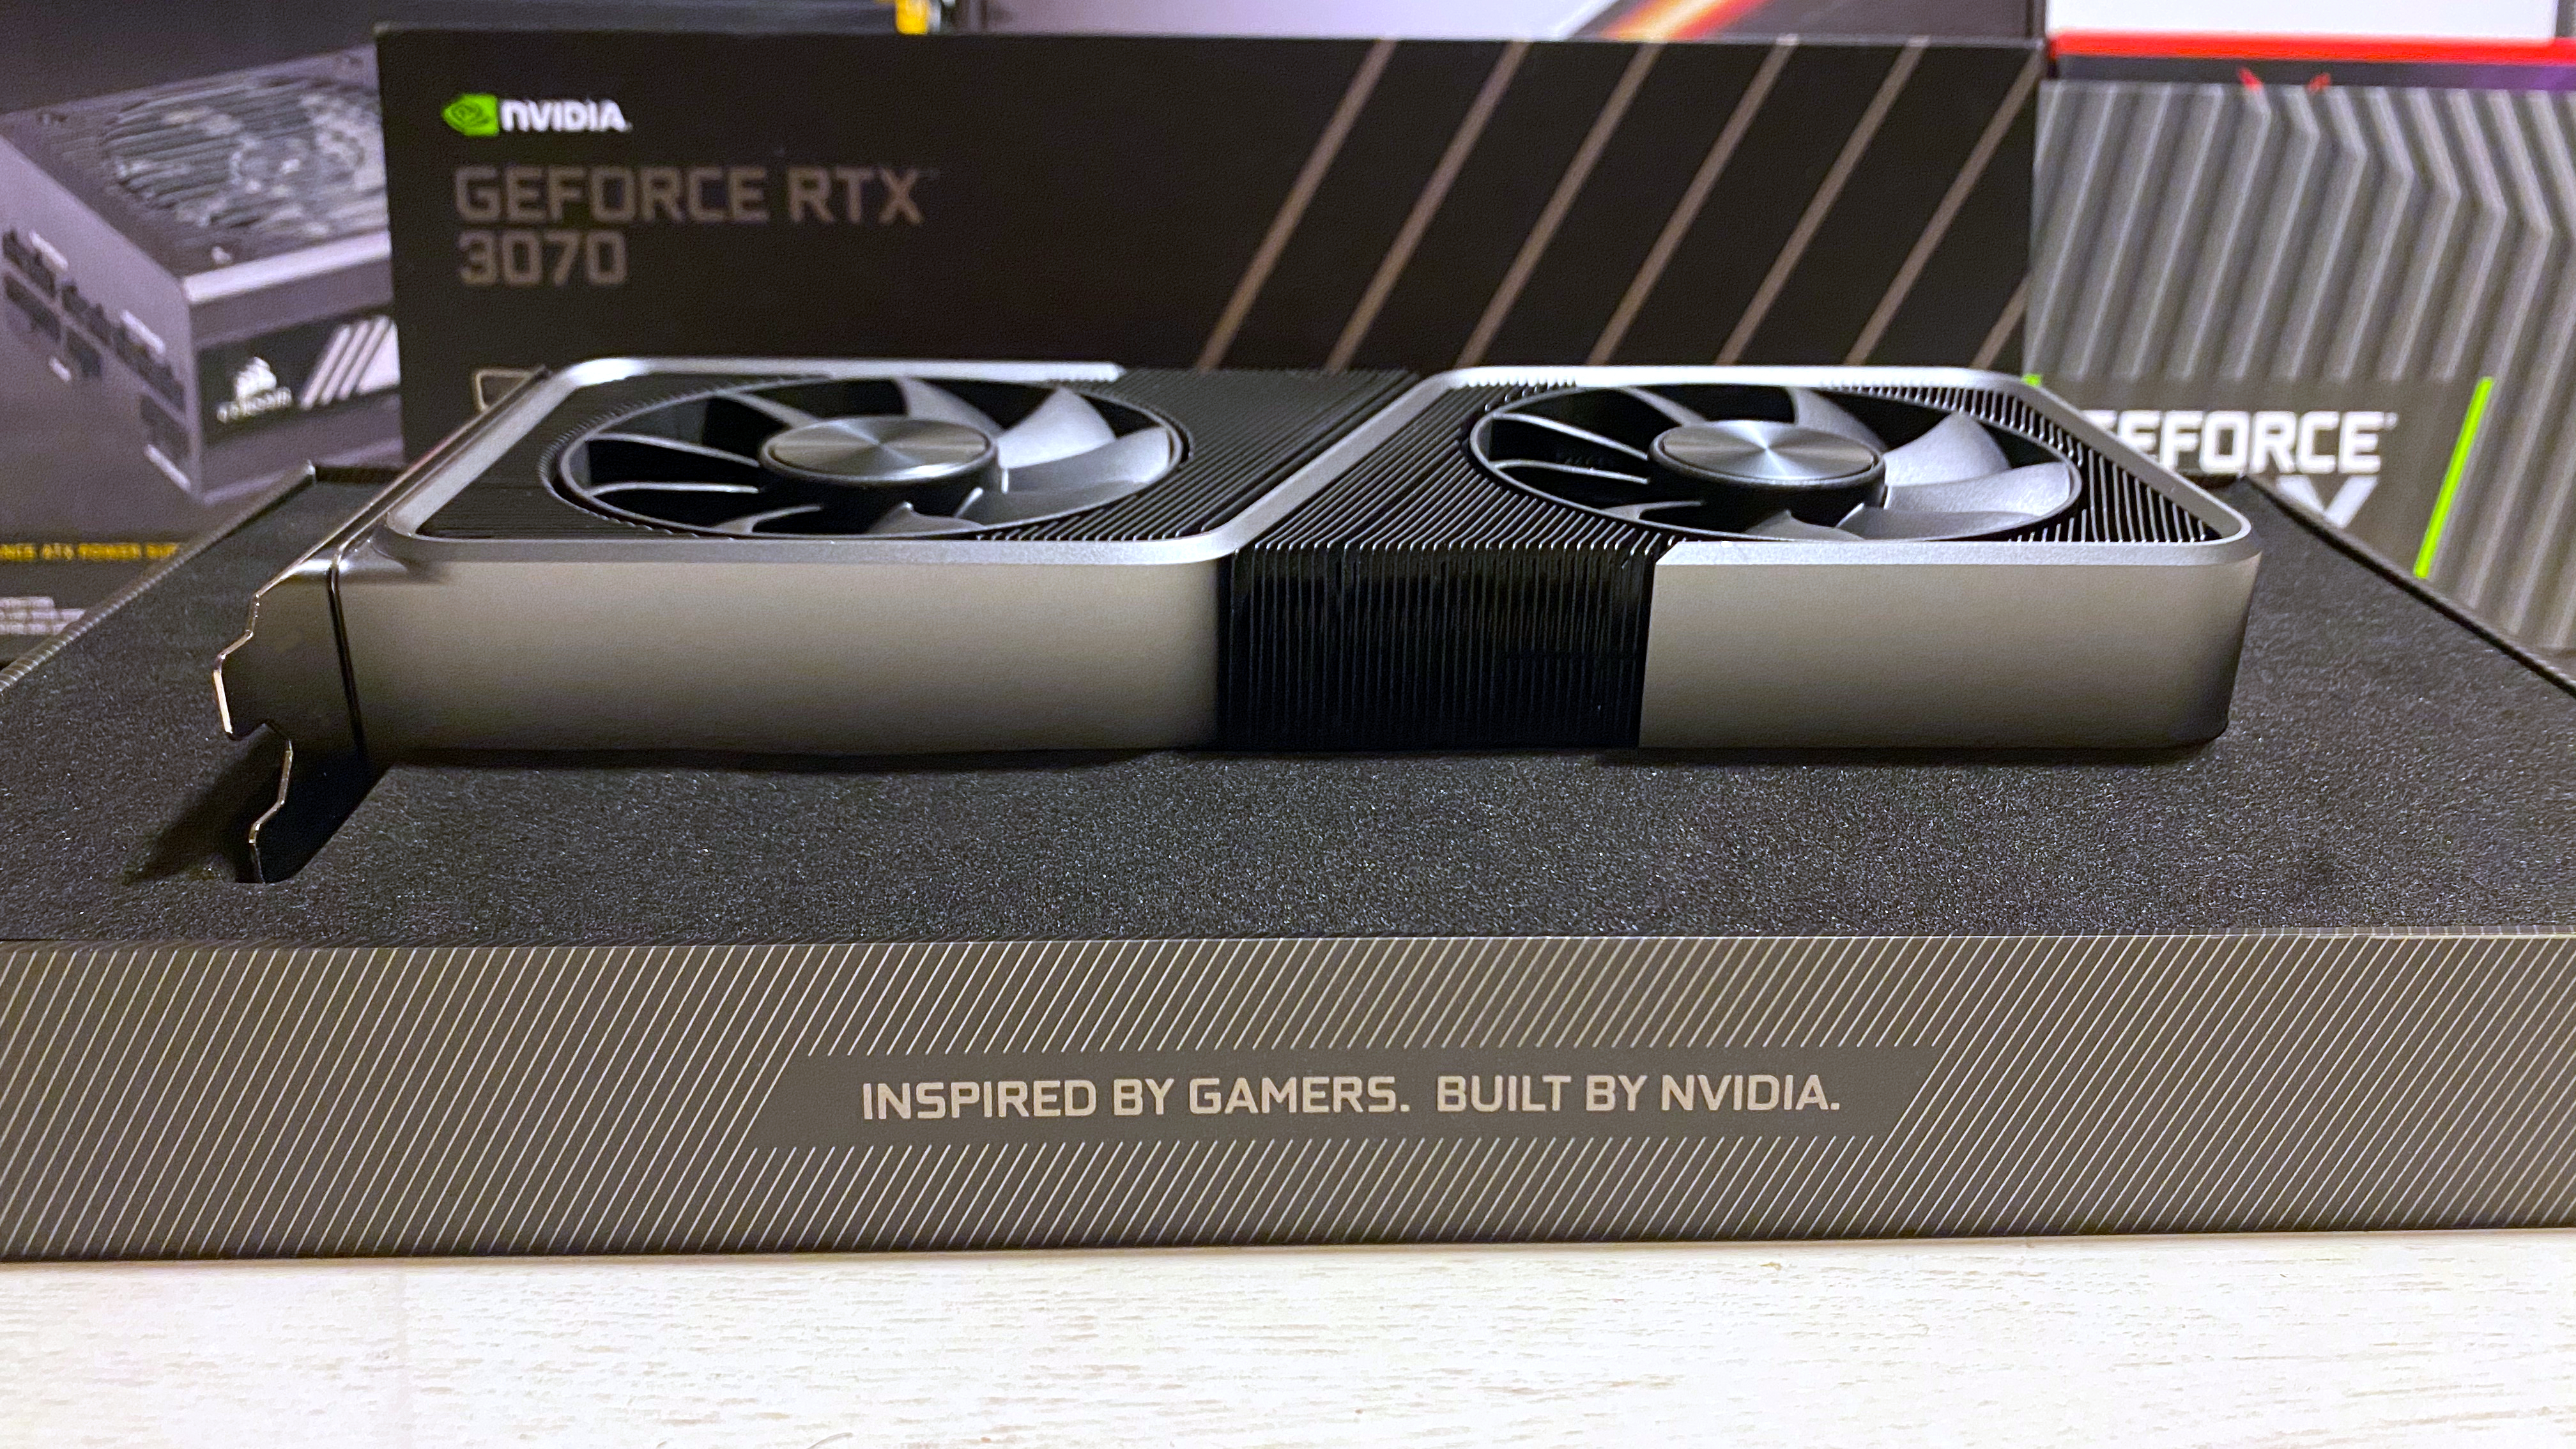 3070 founders edition. RTX 3070 founders Edition. NVIDIA GEFORCE RTX 3070 founders Edition 8gb. RTX 3070 ti founders Edition. RTX 3070 Fe.